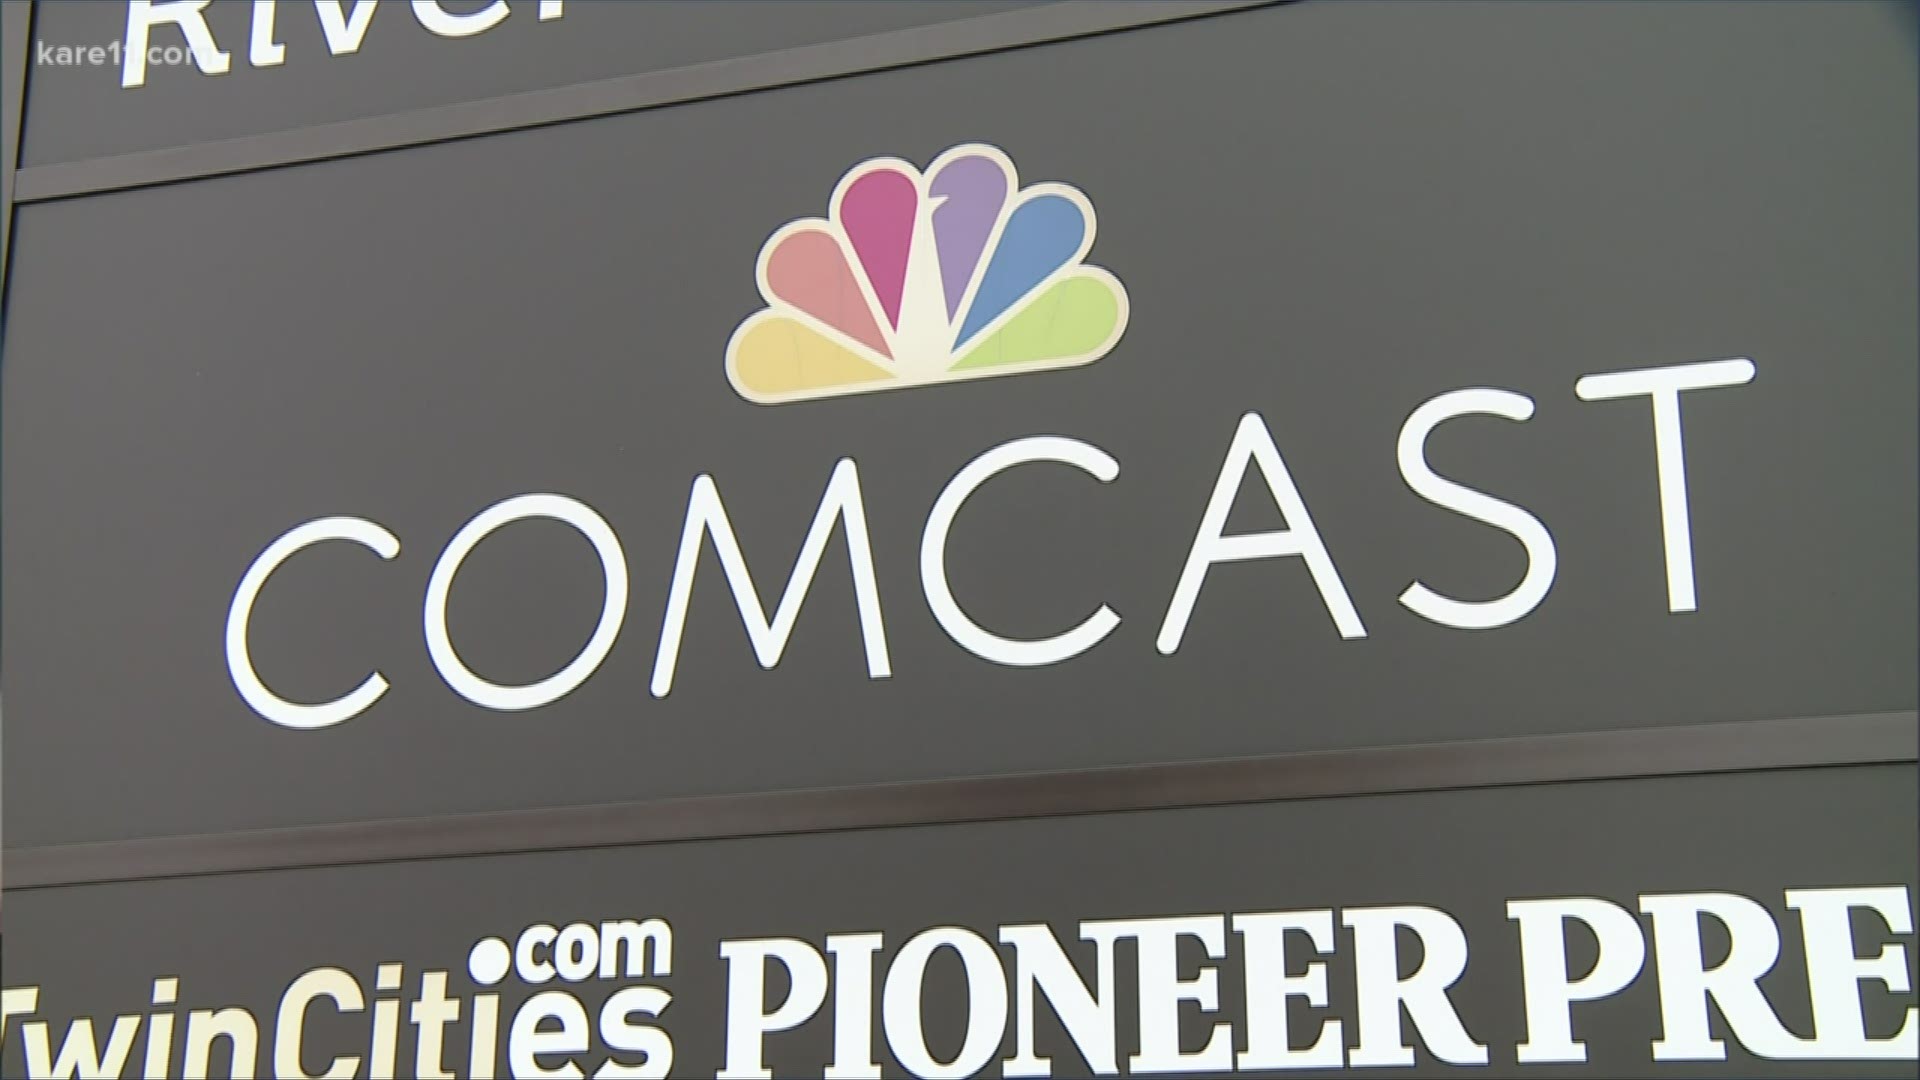 Comcast/Xfinity has agreed to issue refunds to 15,600 Minnesotans and forgive debts for another 16,000.